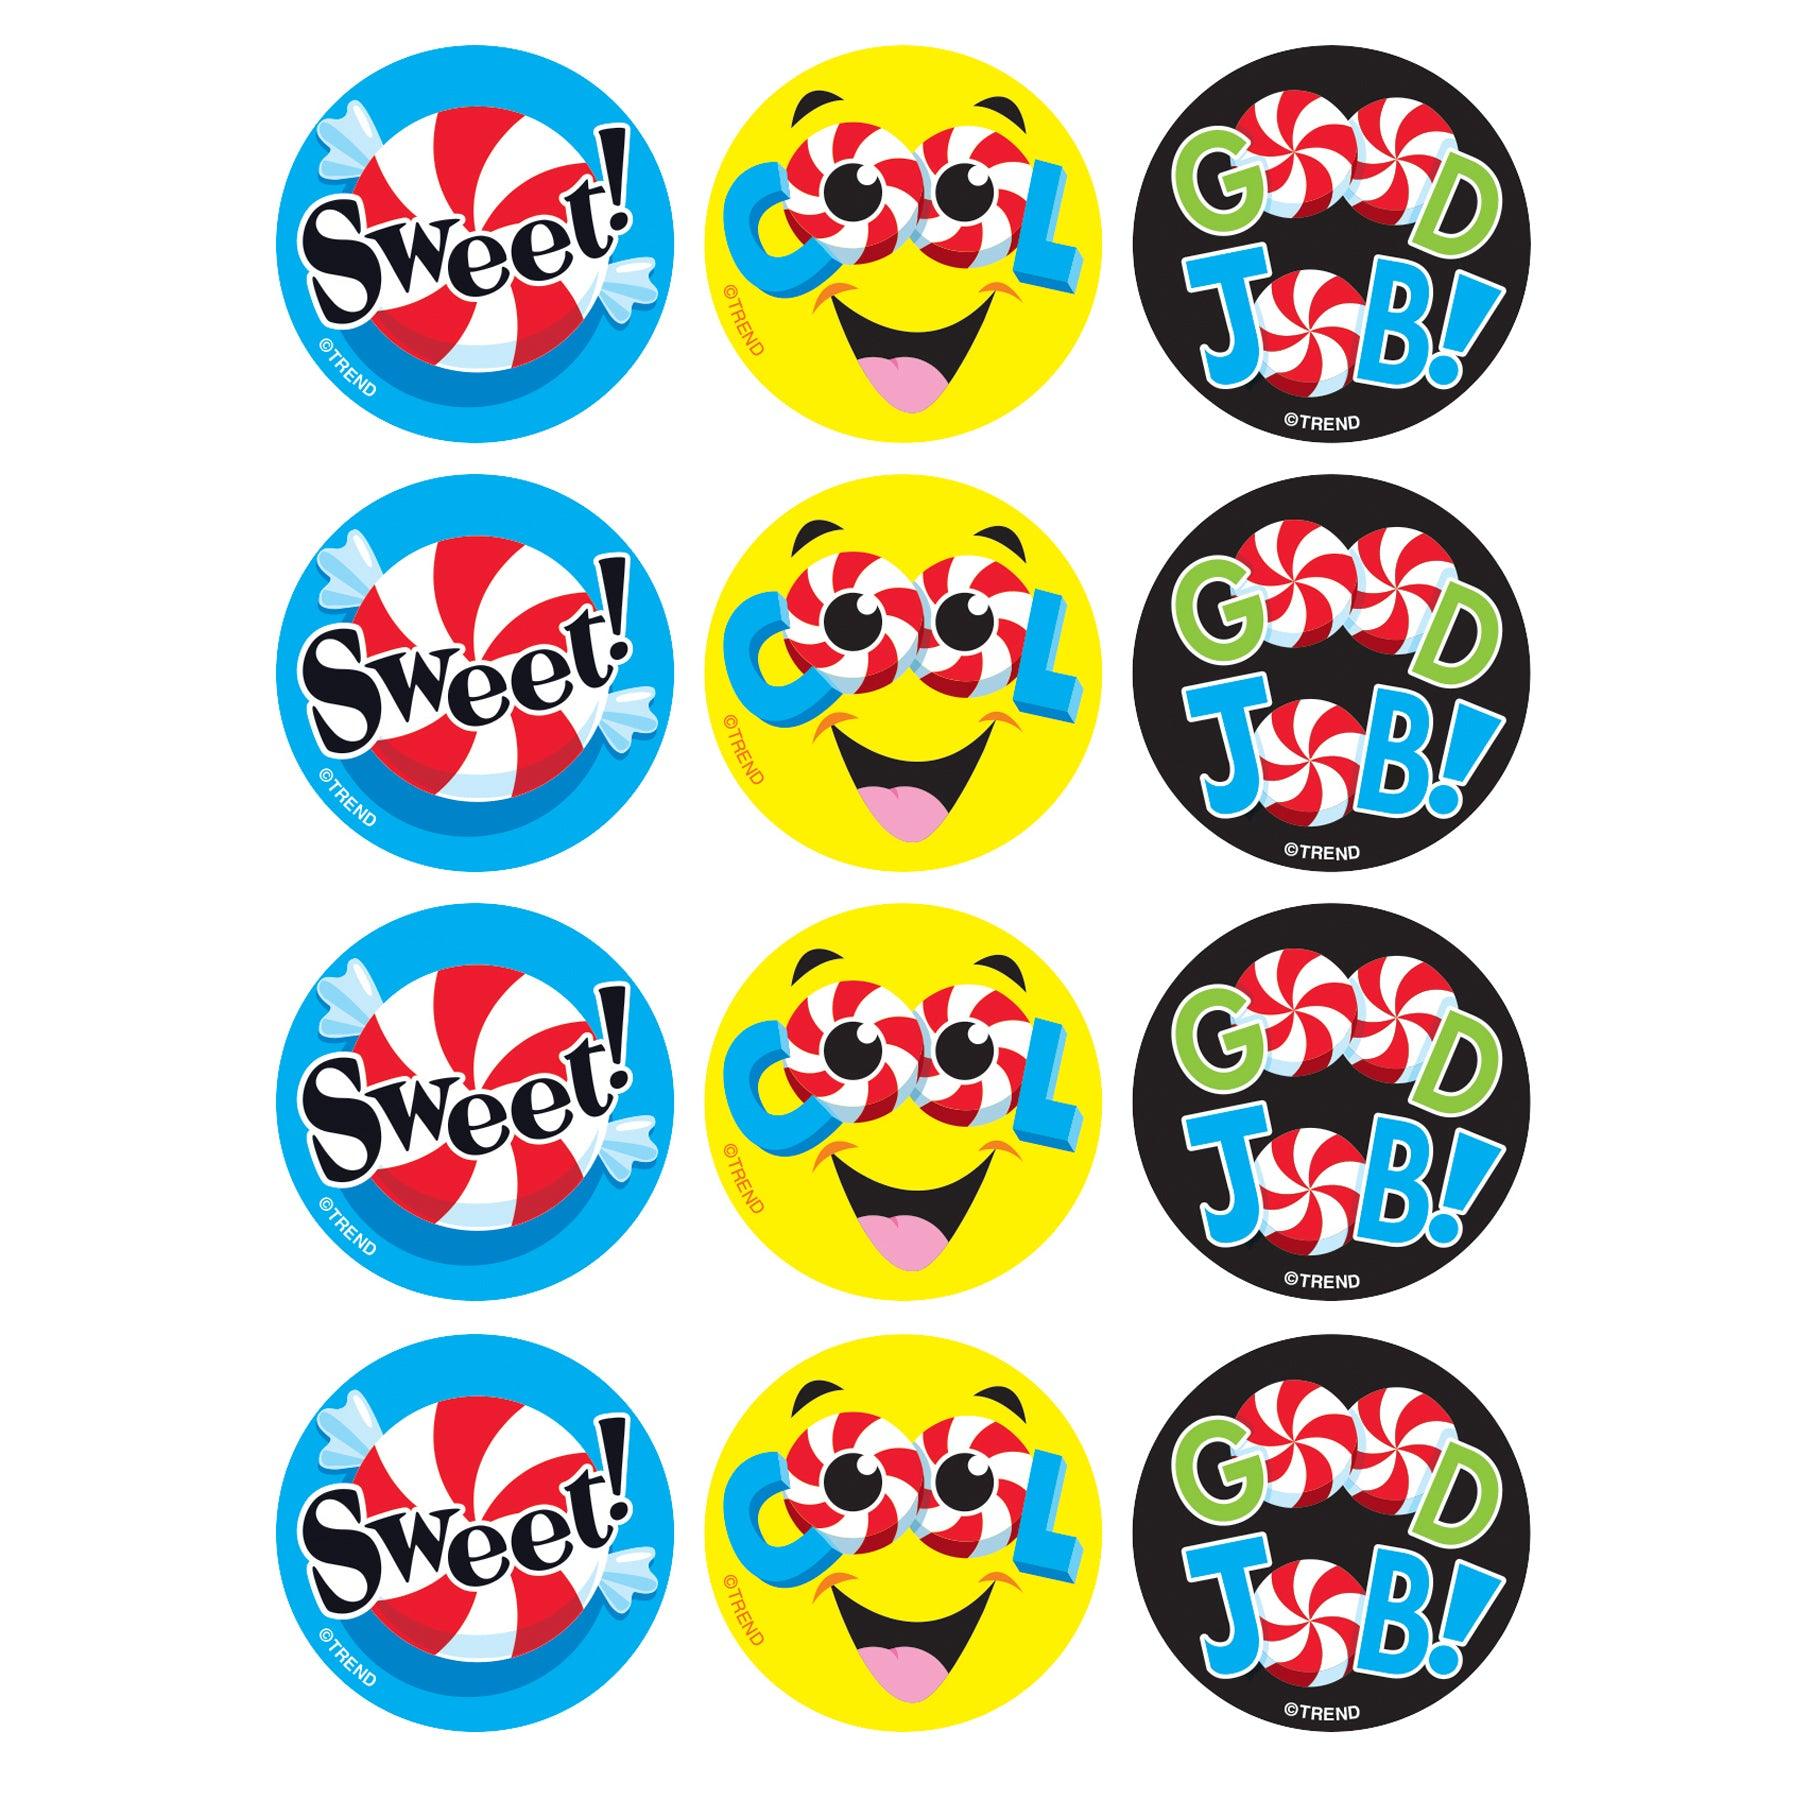 Candy Compli-MINTS/Peppermint Stinky Stickers®, 48 Per Pack, 6 Packs - Loomini